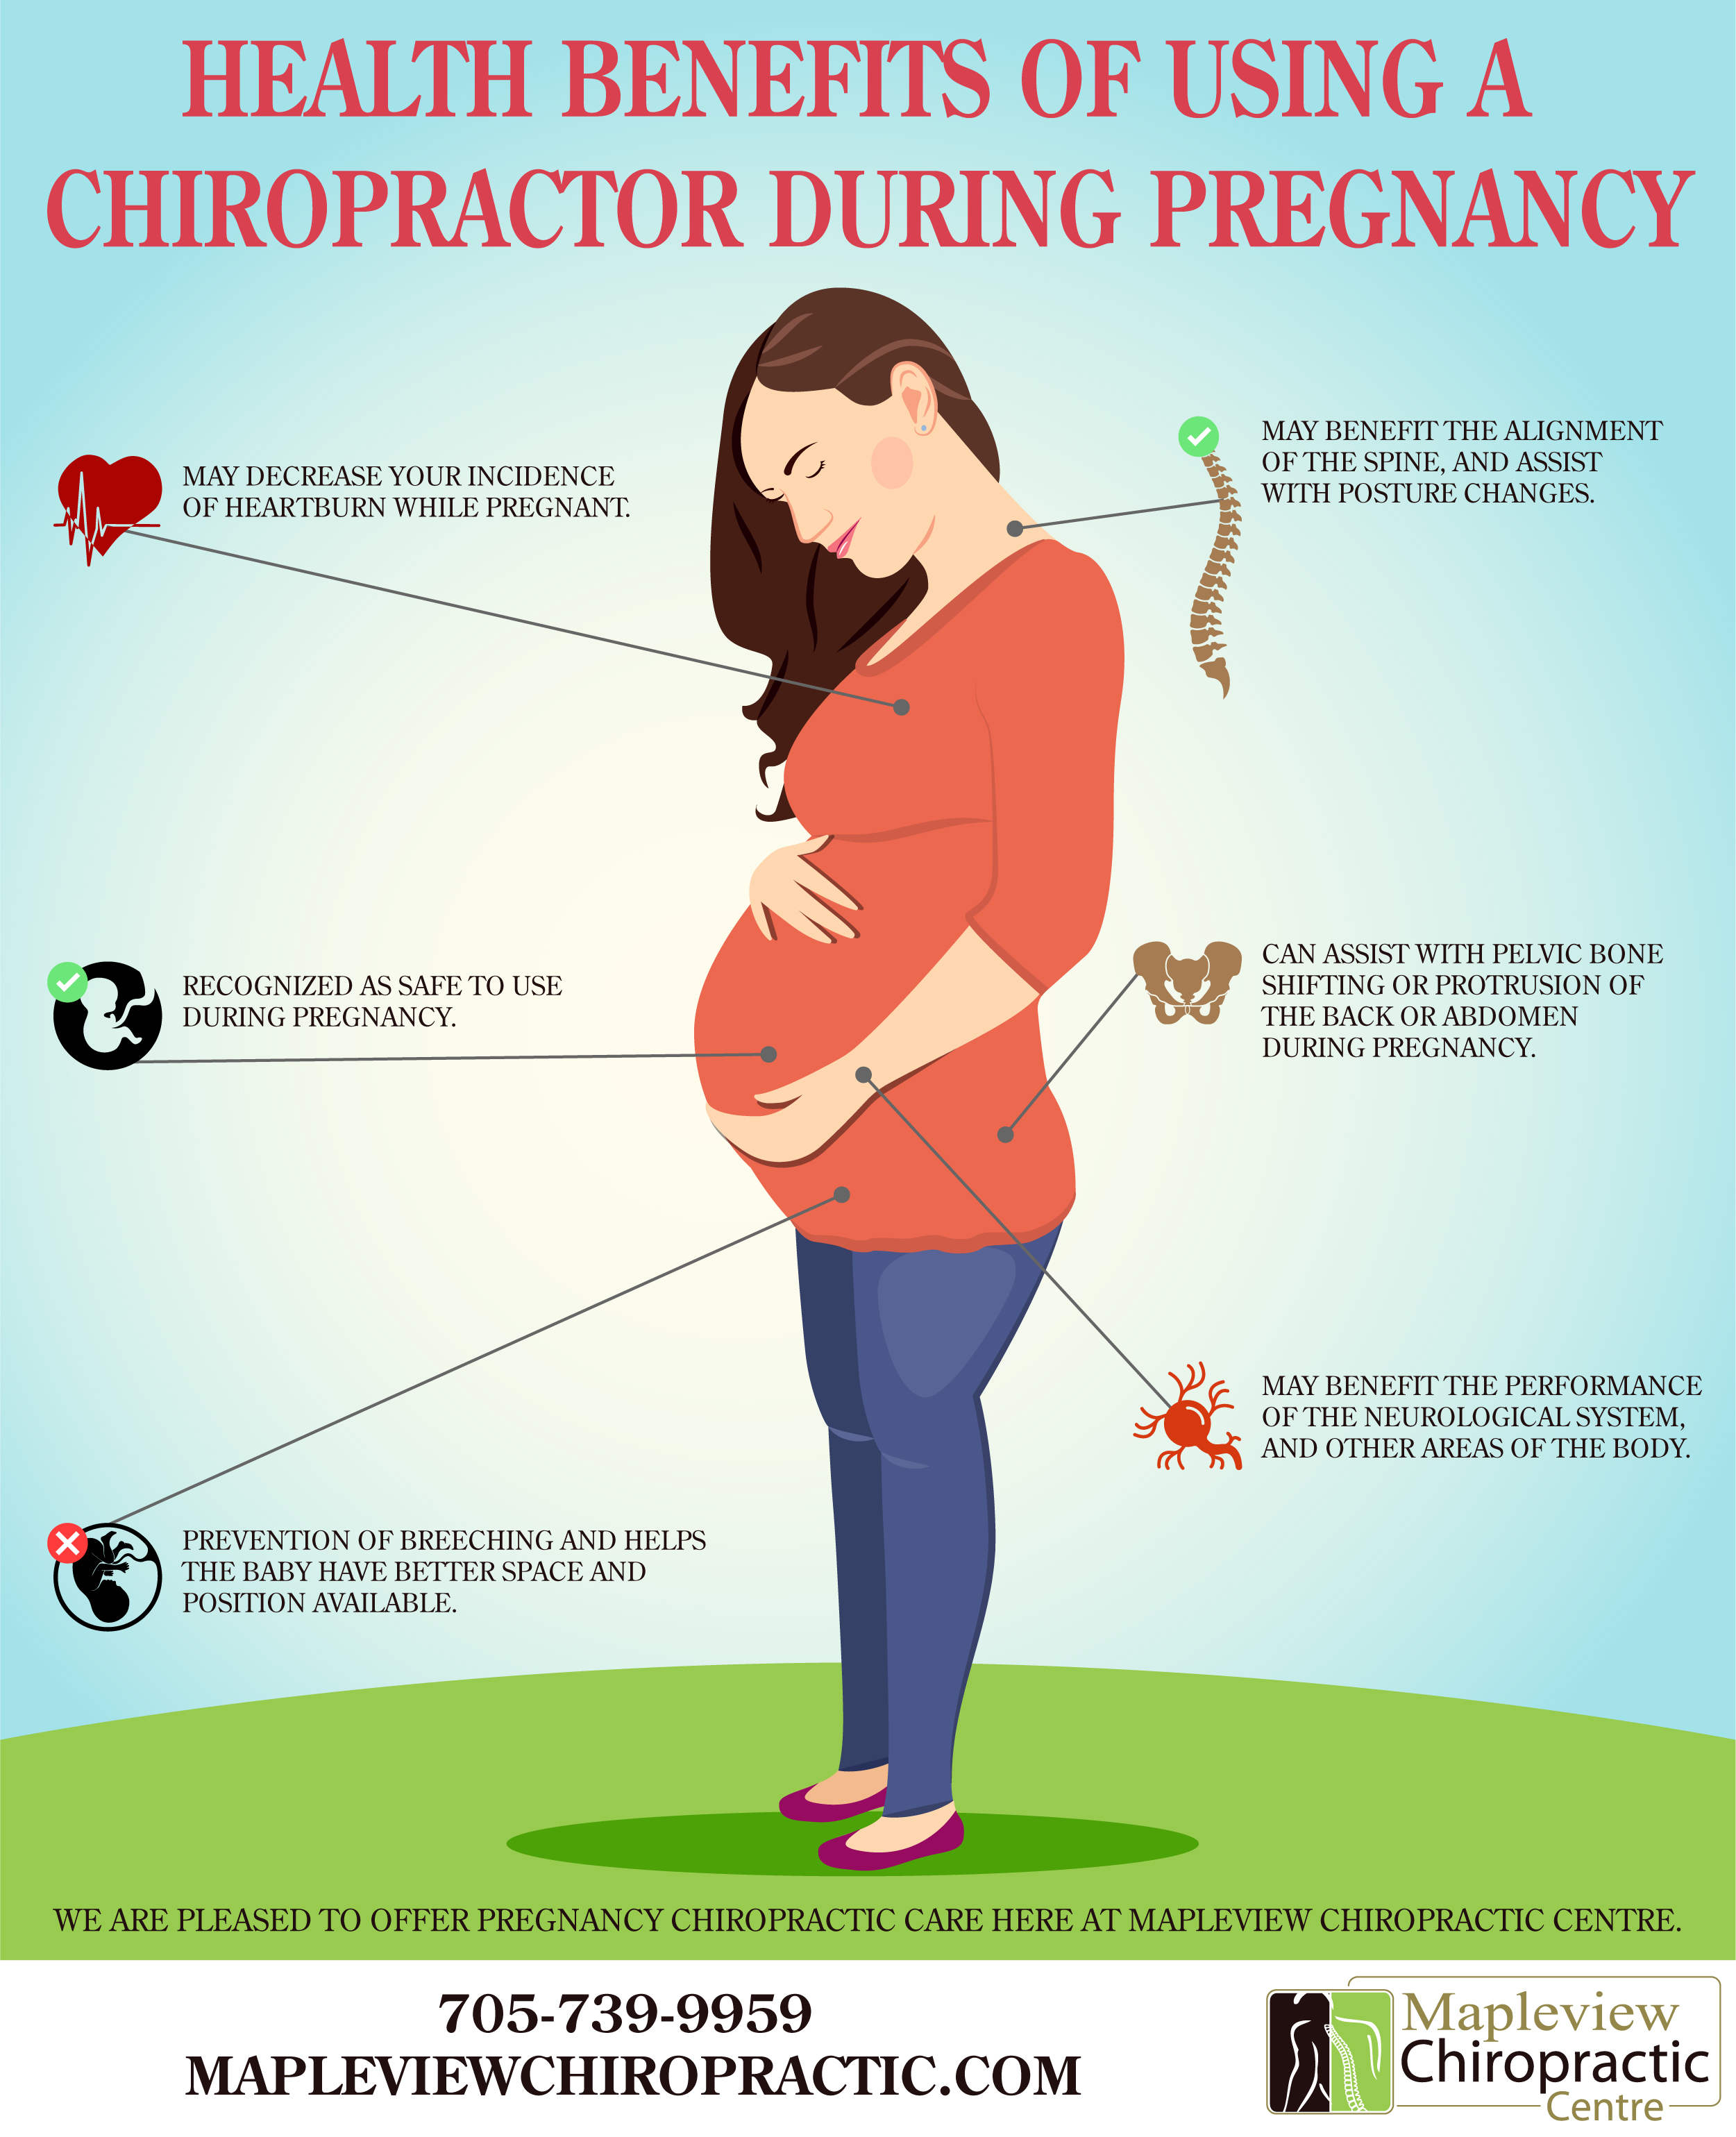 Have You Ever Considered Using a Pregnancy Chiropractor?